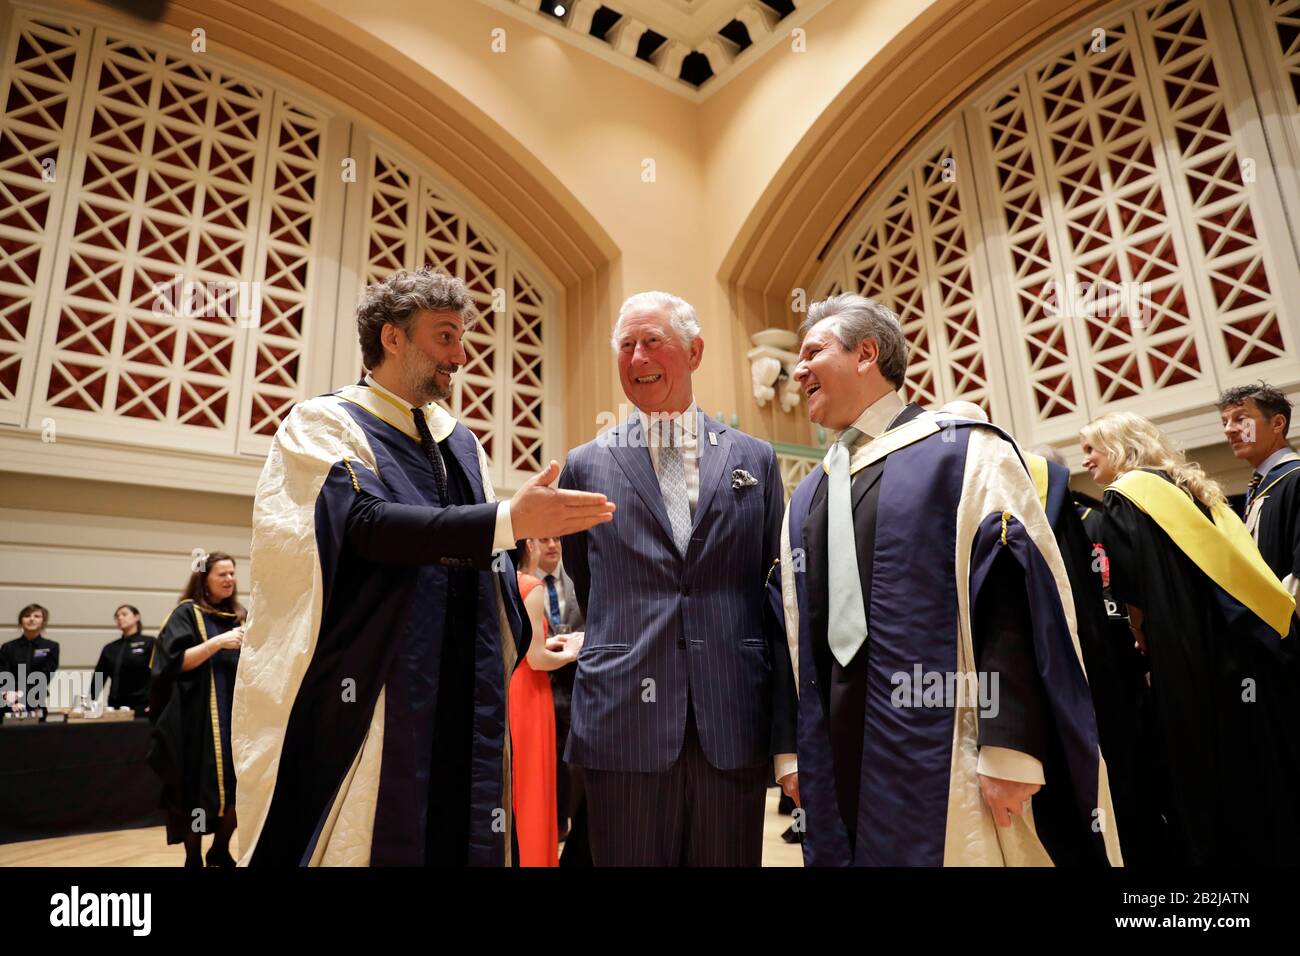 The Prince of Wales with German operatic tenor Jonas Kaufmann (left) and English-Italian conductor and pianist Sir Antonio Pappano during a reception in the new Performance Hall, after presenting them with honorary Doctor of Music awards at the Royal College of Music's annual awards in London. PA Photo. Picture date: Tuesday March 3, 2020. See PA story ROYAL Charles. Photo credit should read: Matt Dunham/PA Wire Stock Photo